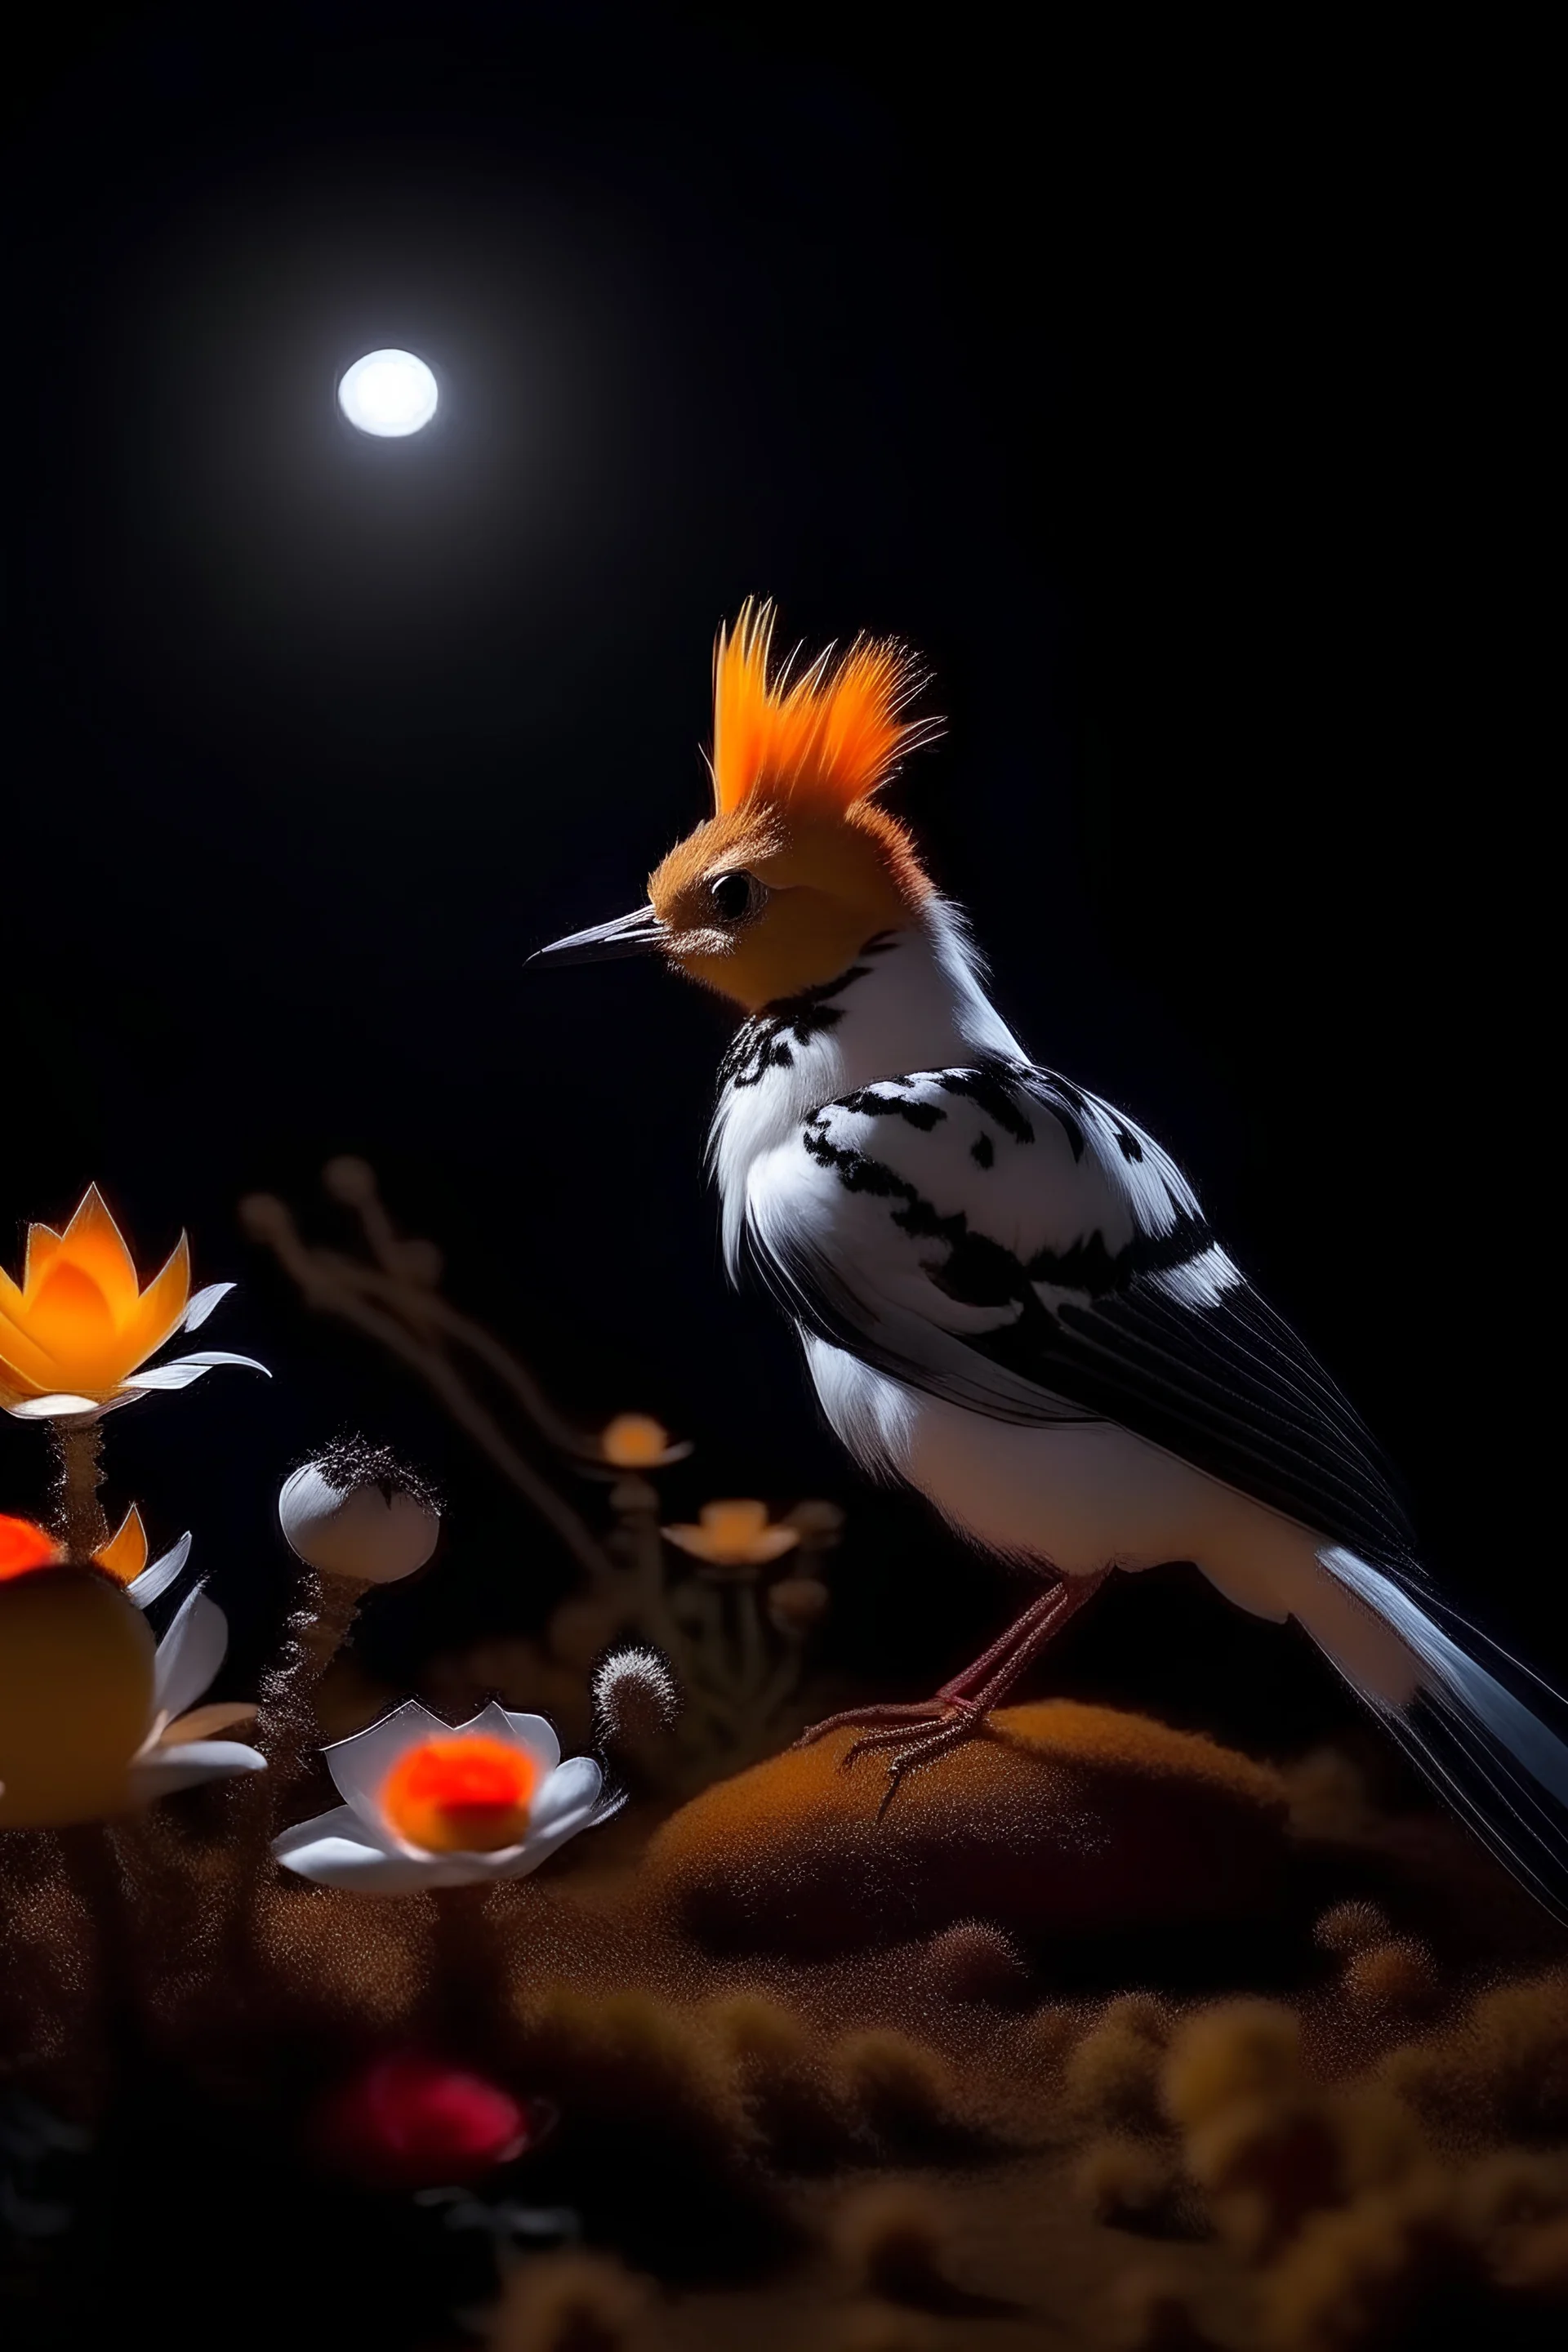 A hoopoe without color bird, stands on a dead flower at night a glowing flower